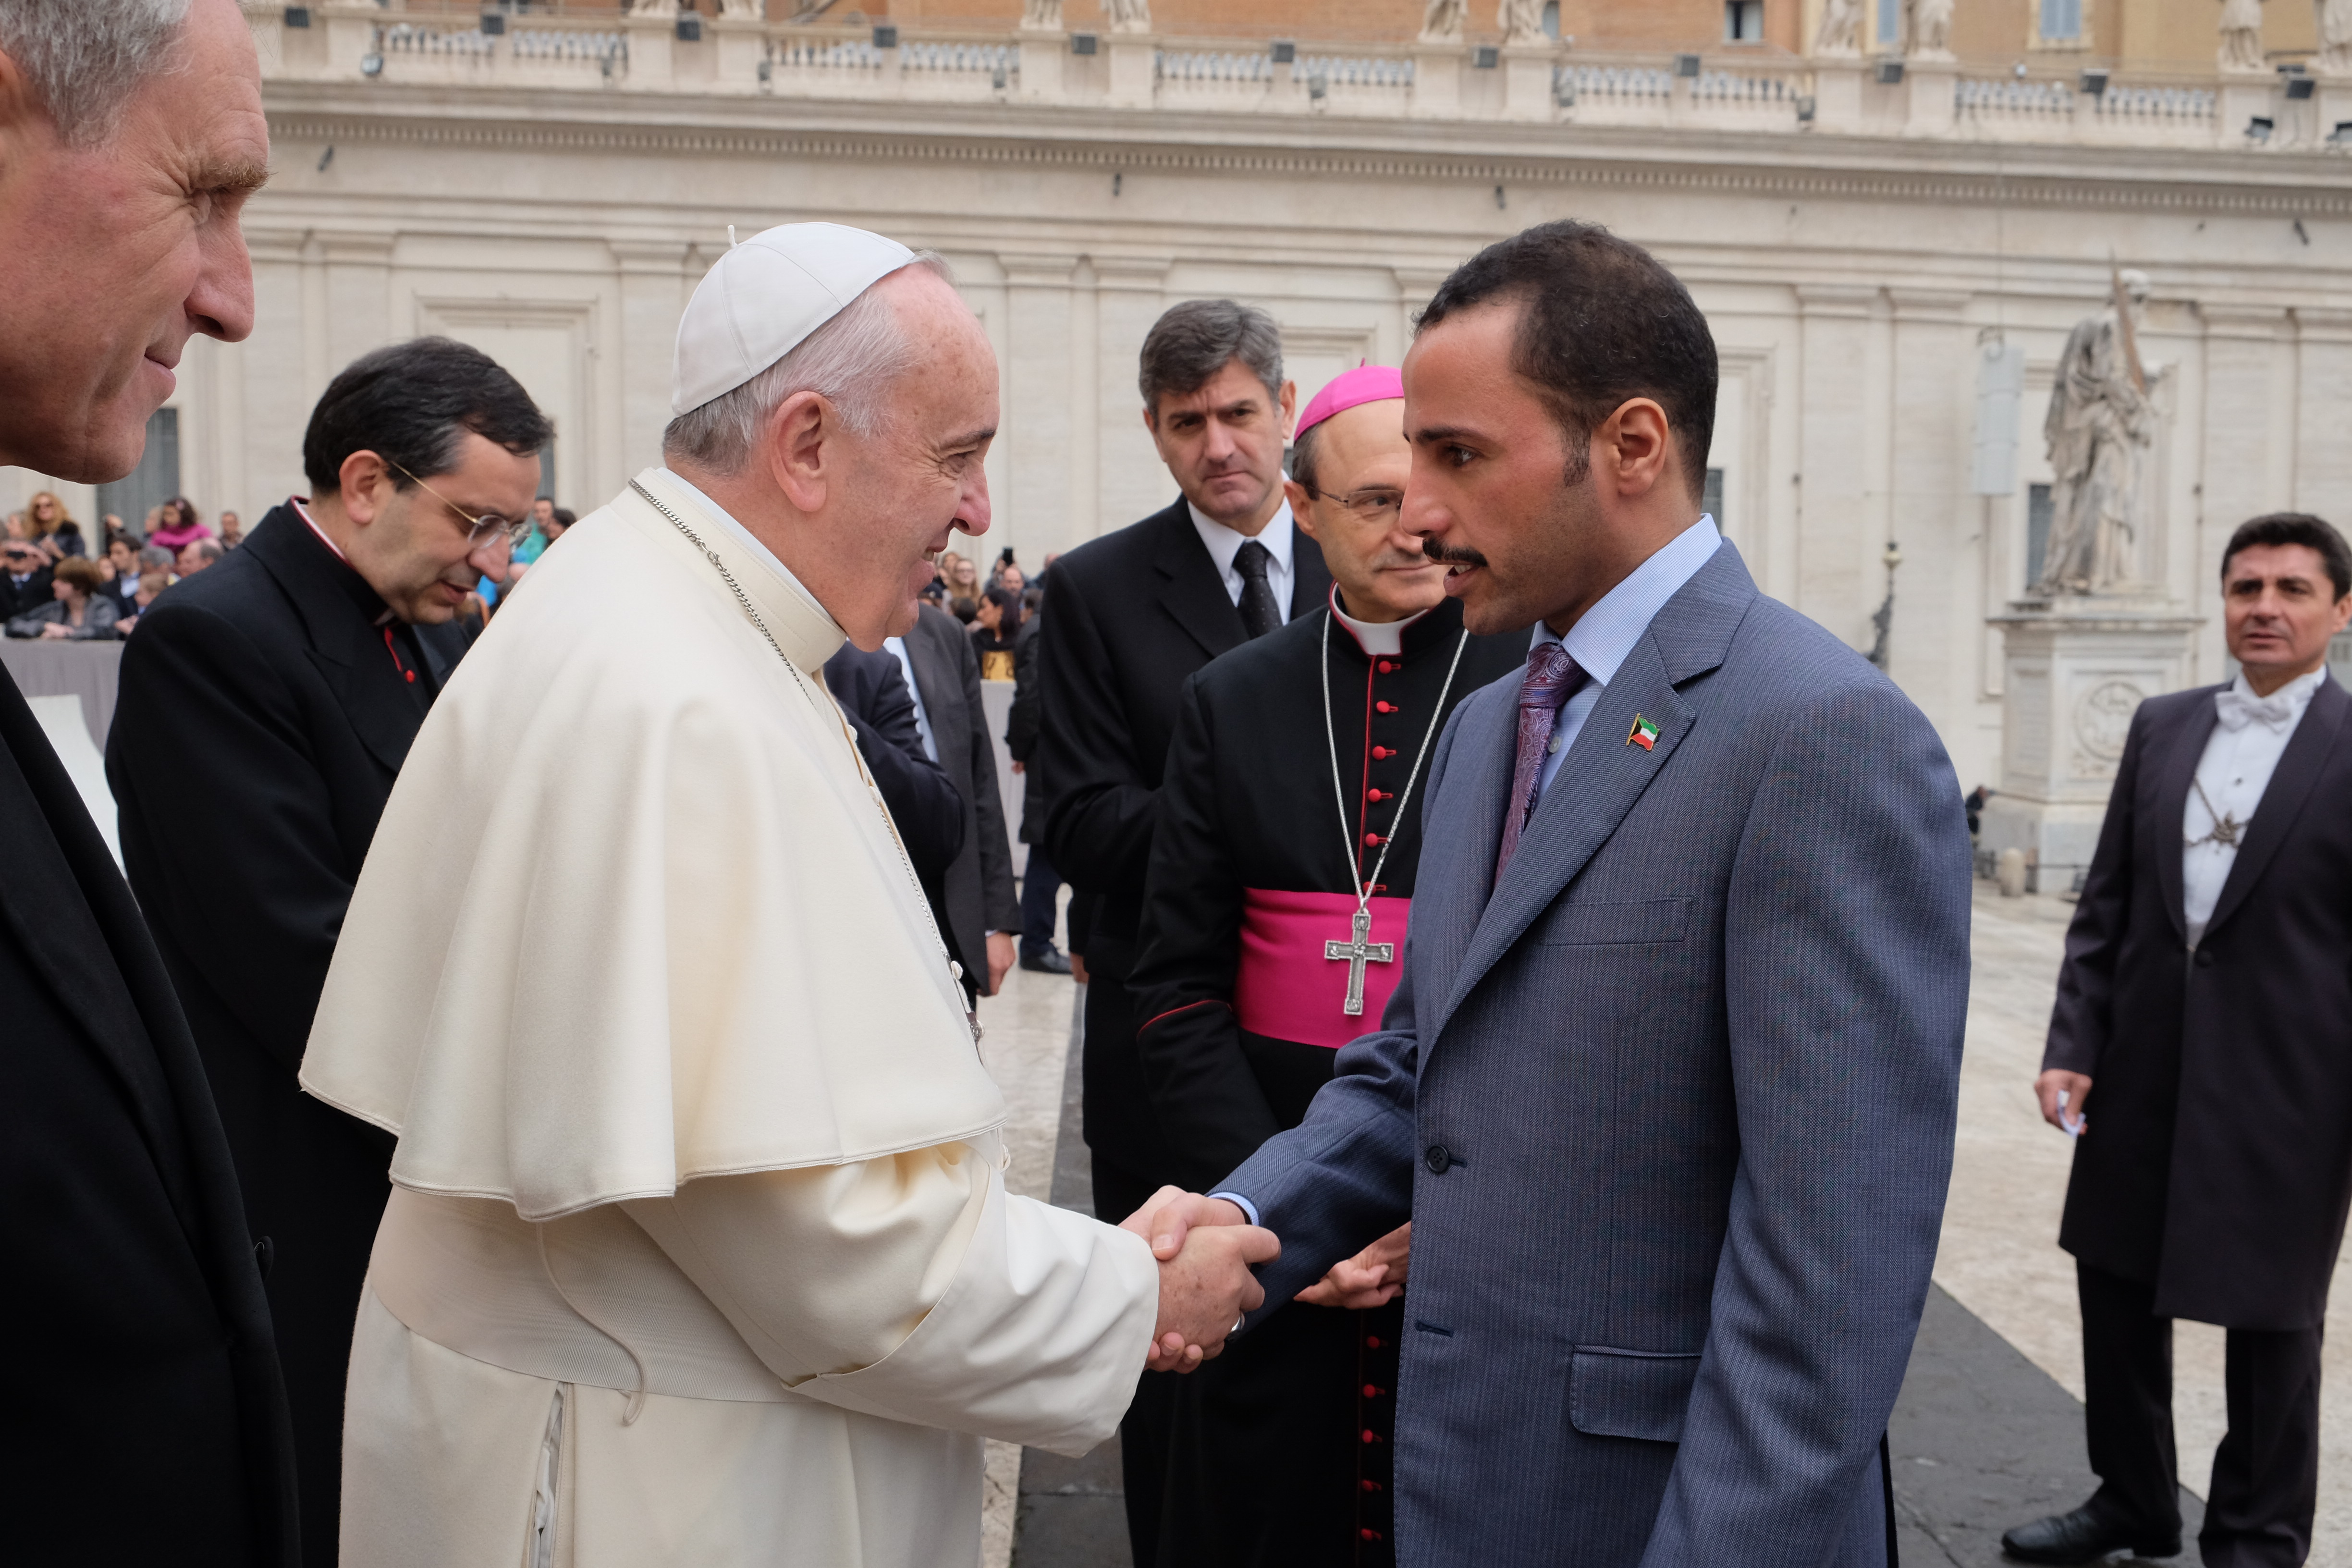 National Assembly Speaker Marzouk Al-Ghnaim meets Pope Francis